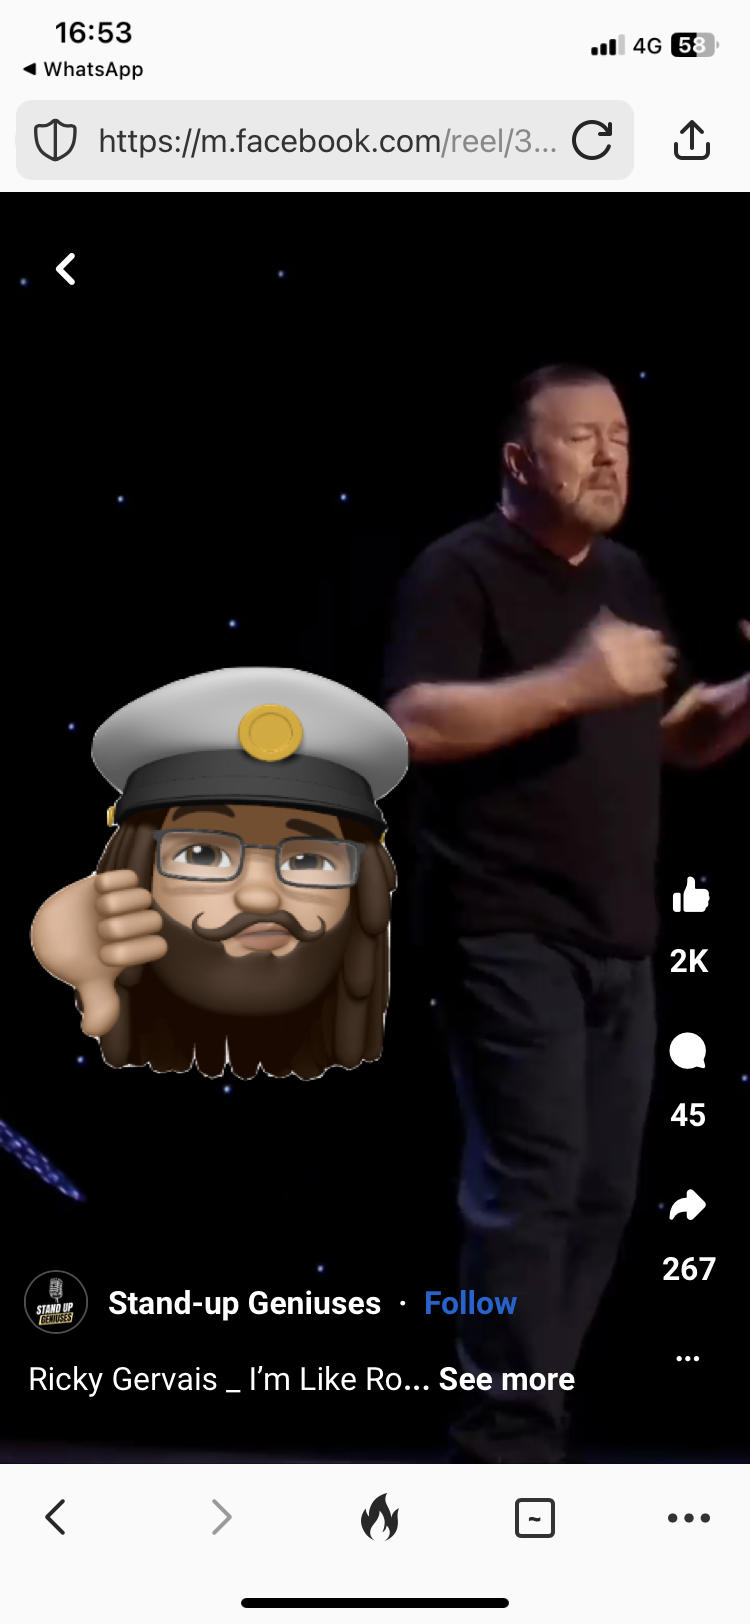 A screenshot of a video of Ricky Gervais doing standup with an emoji with a captain's hat, glasses and a beard giving thumbs d0wn